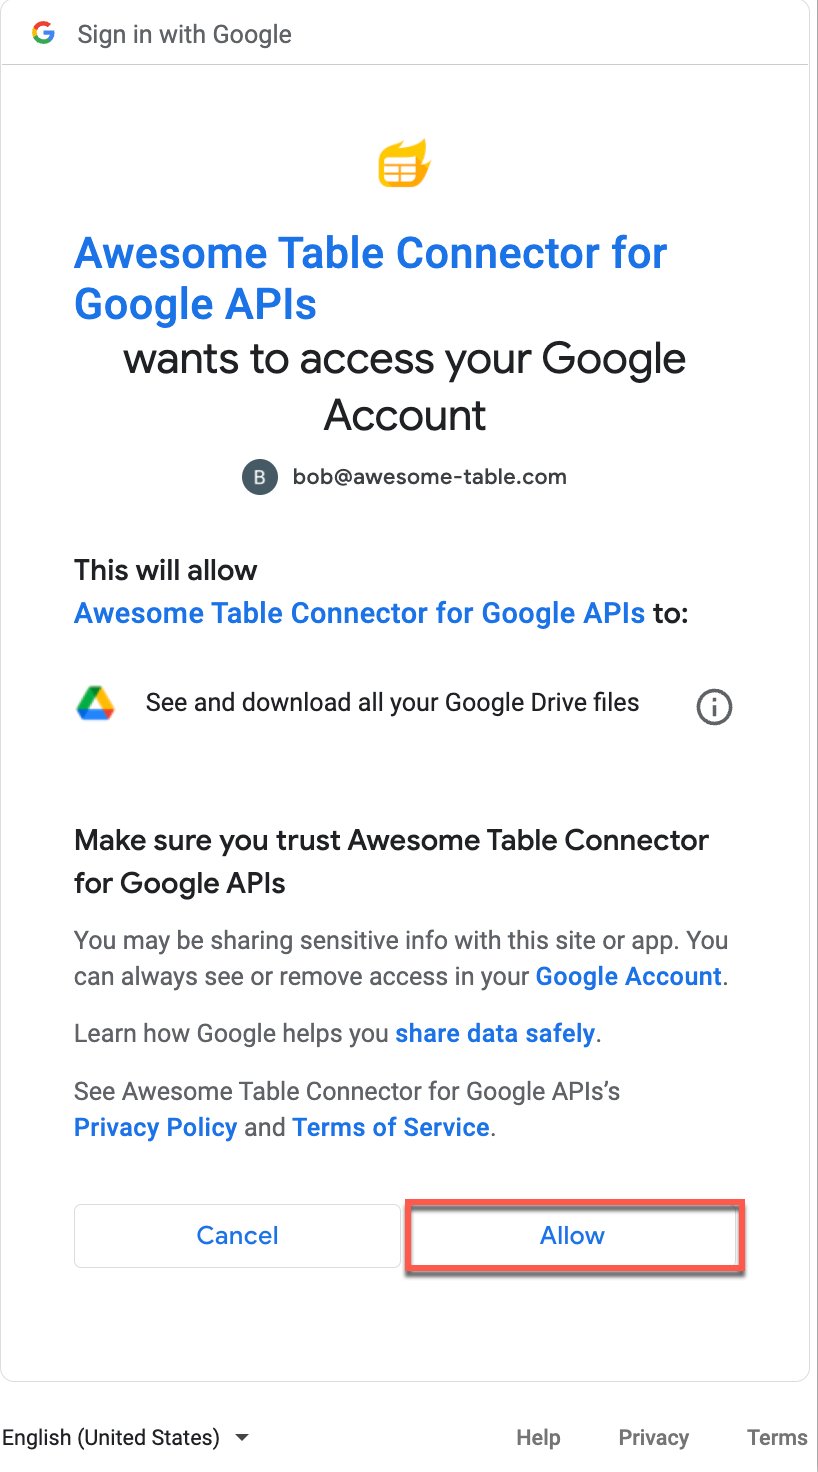 It allows Awesome Table Connectors to see and download all your Google Drive files